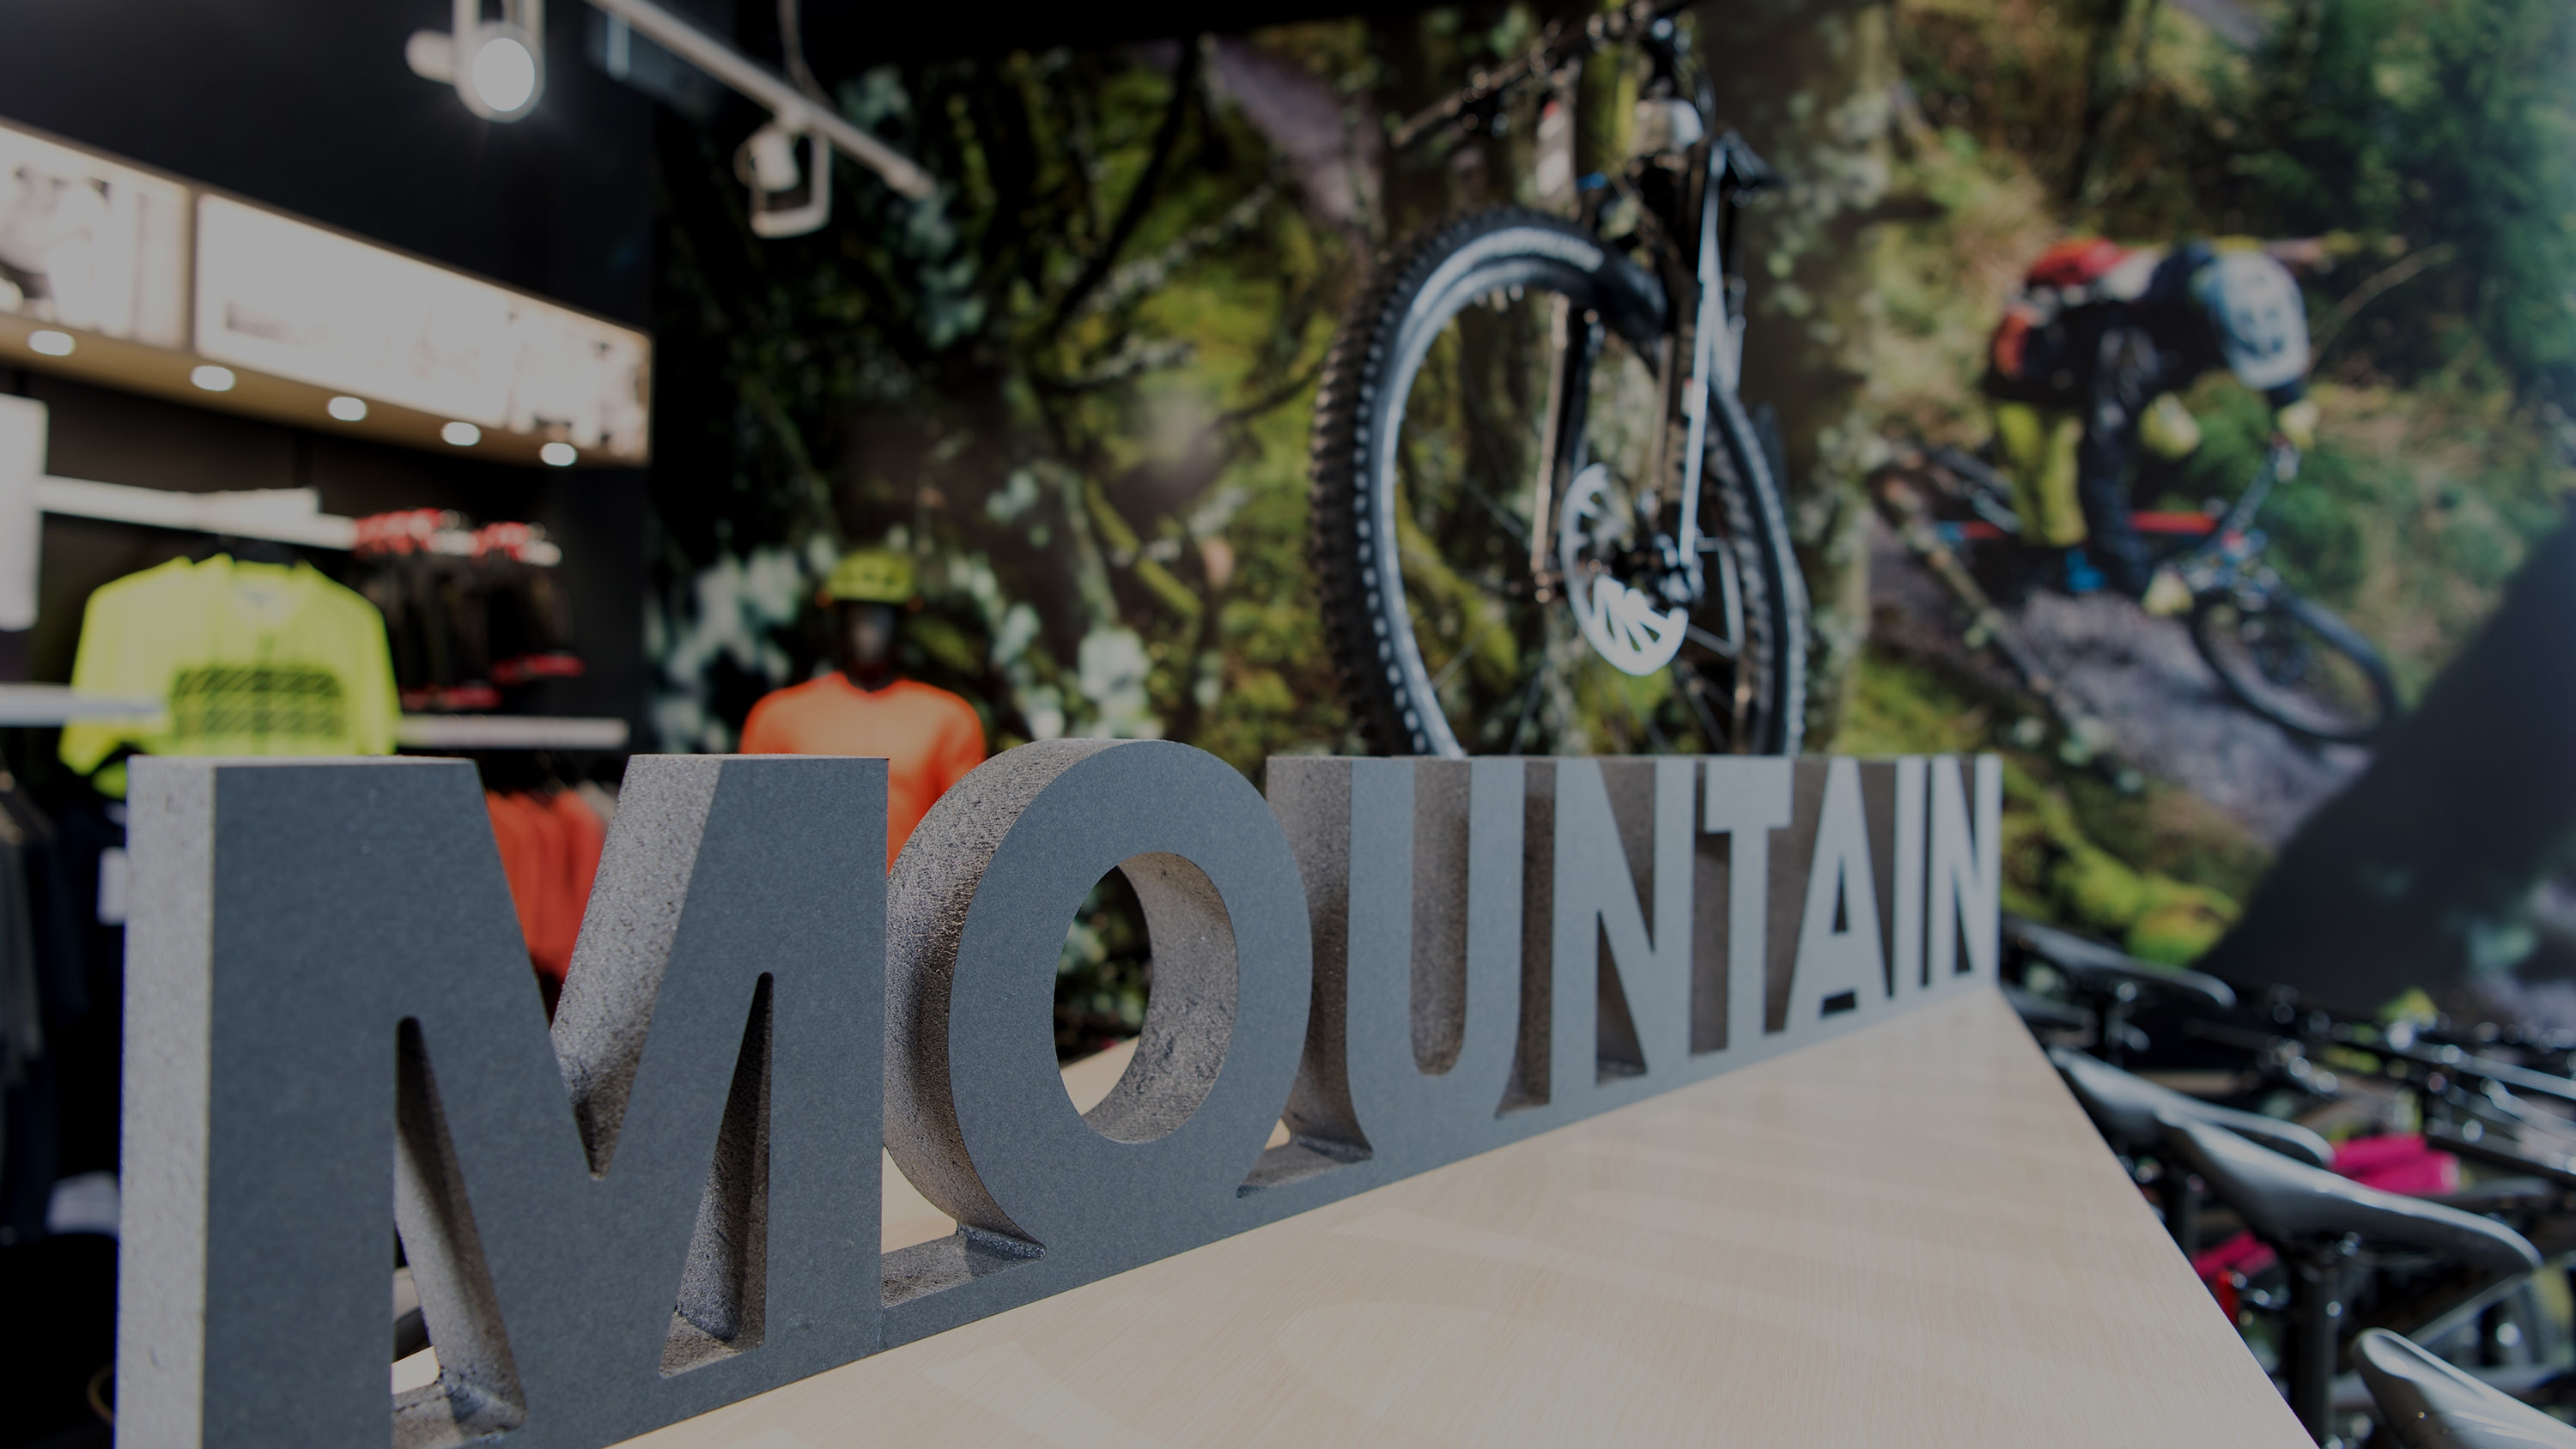 best place to buy mountain bike